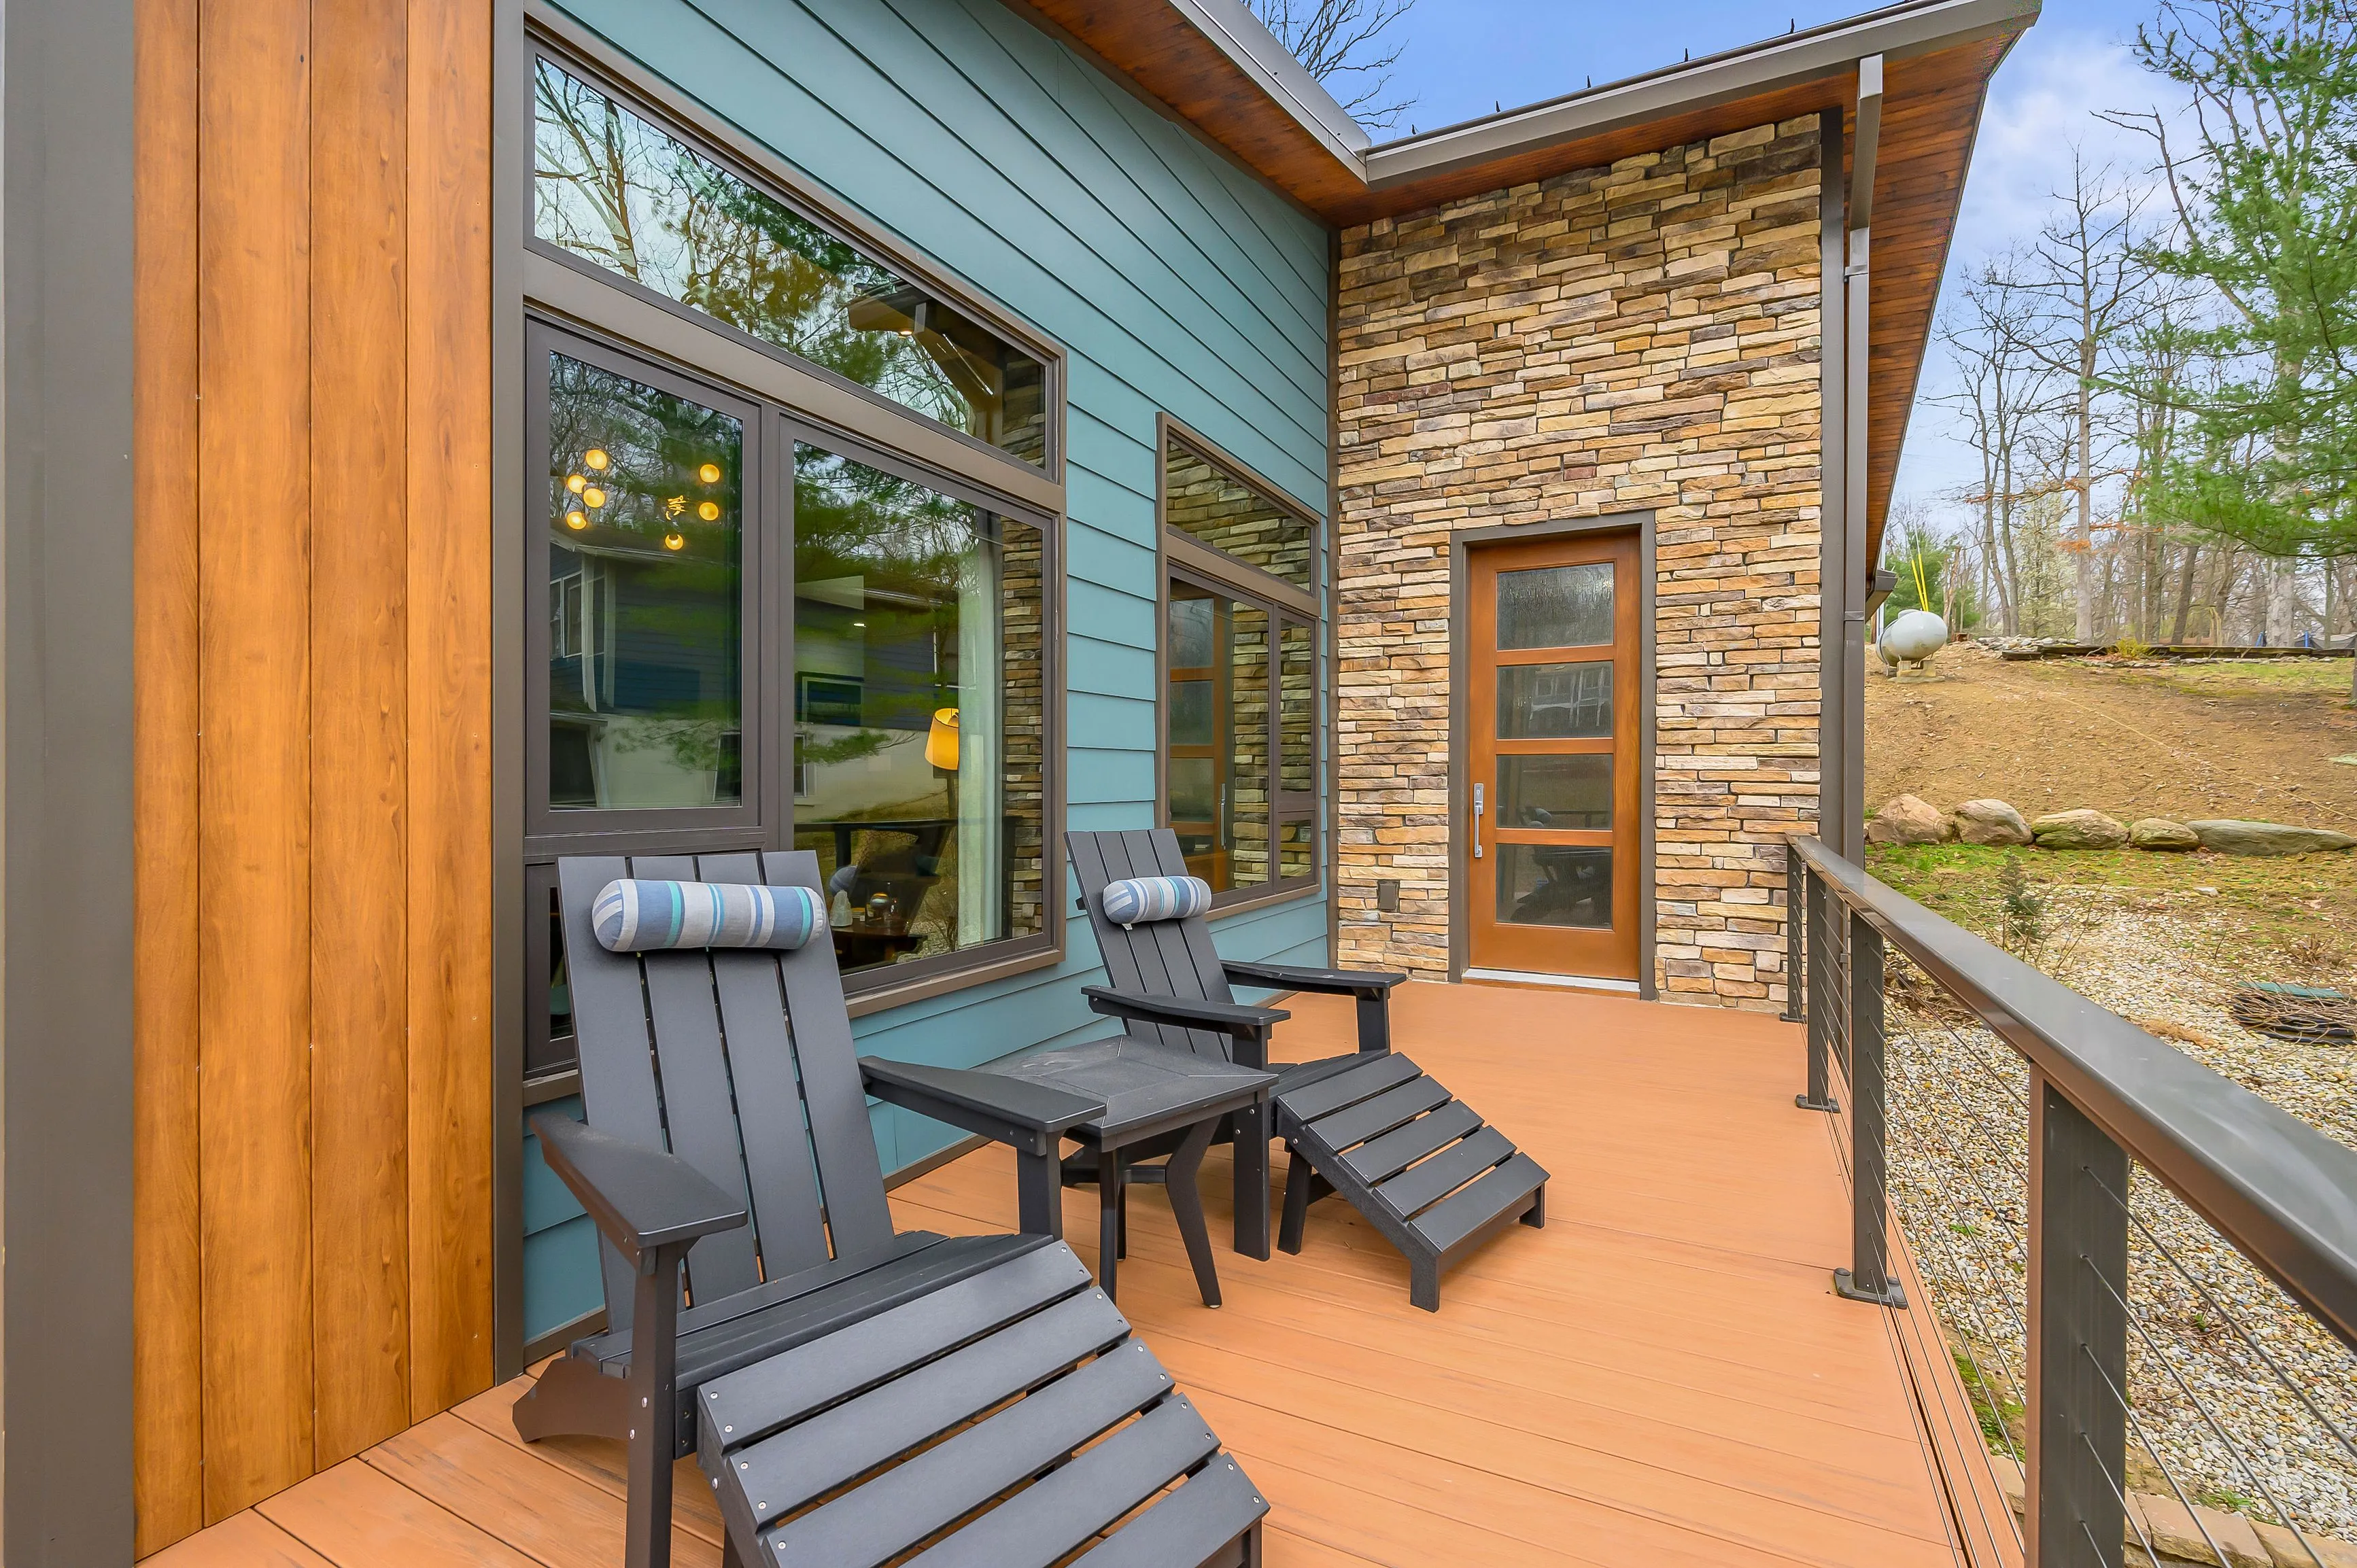 Cozy patio area with two Adirondack chairs and a small table on a wooden deck, adjacent to a house with blue siding and stone accents.